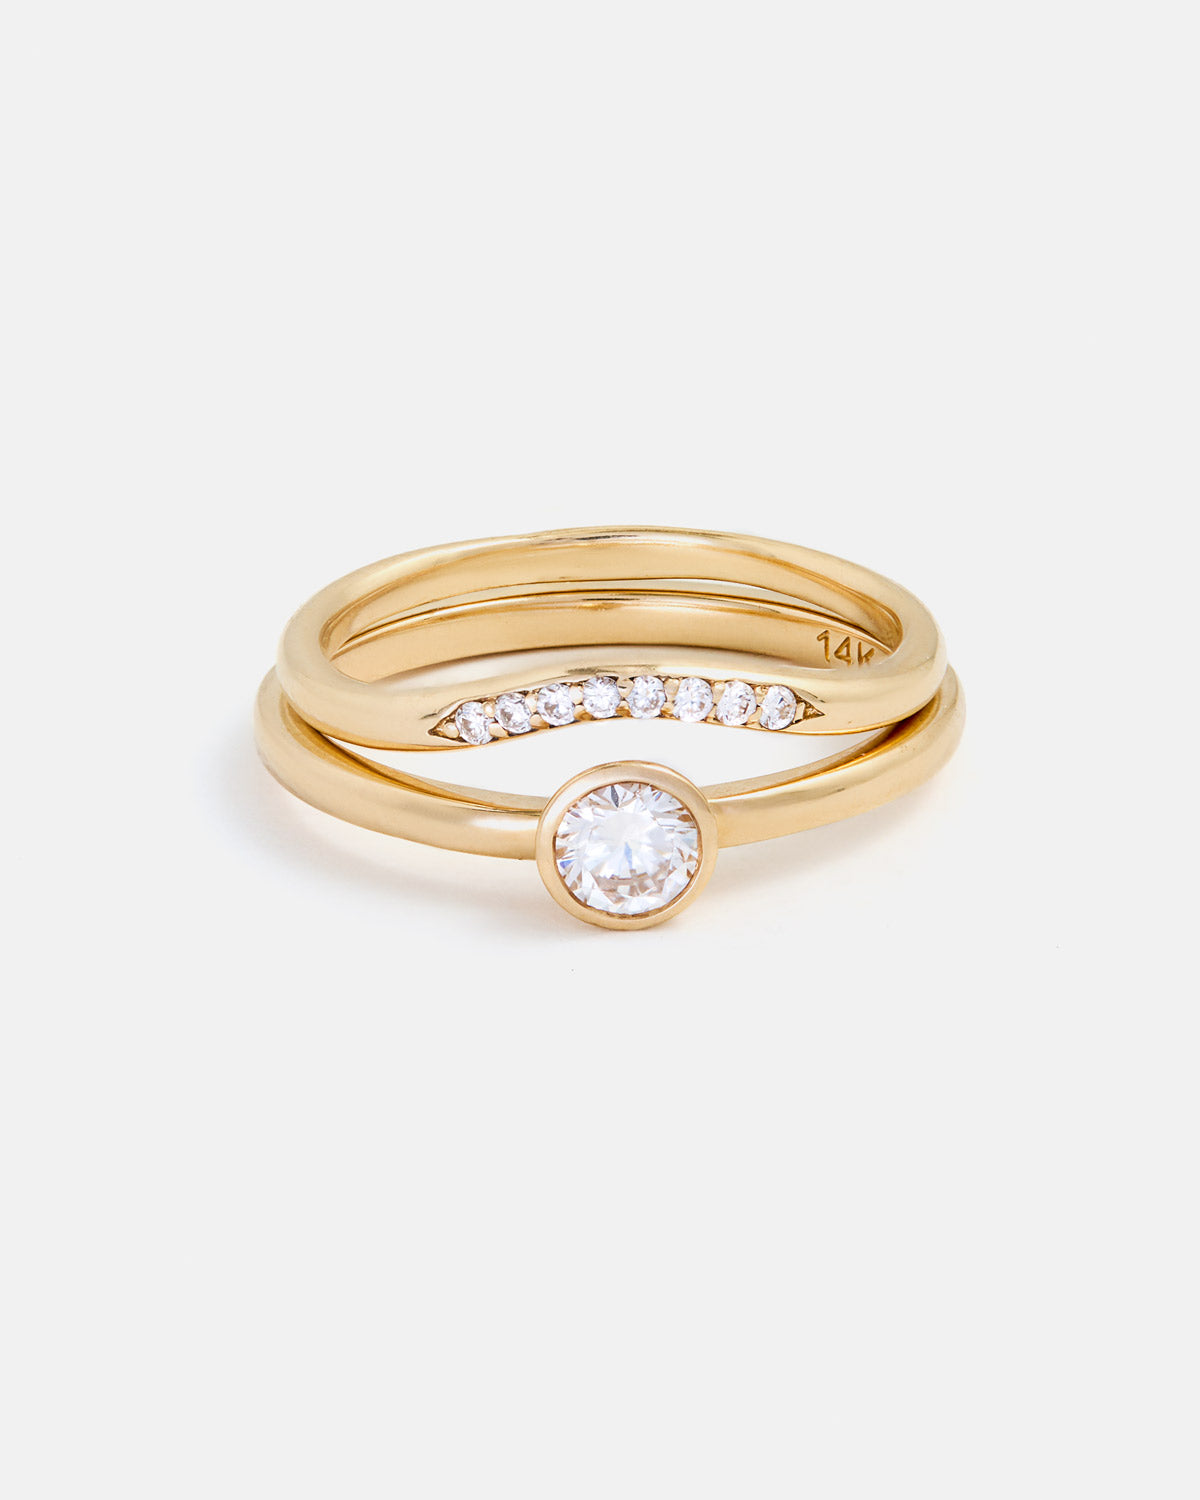 Origines Solitaire Ring and Stratura Wave Wedding Band with lab grown diamonds